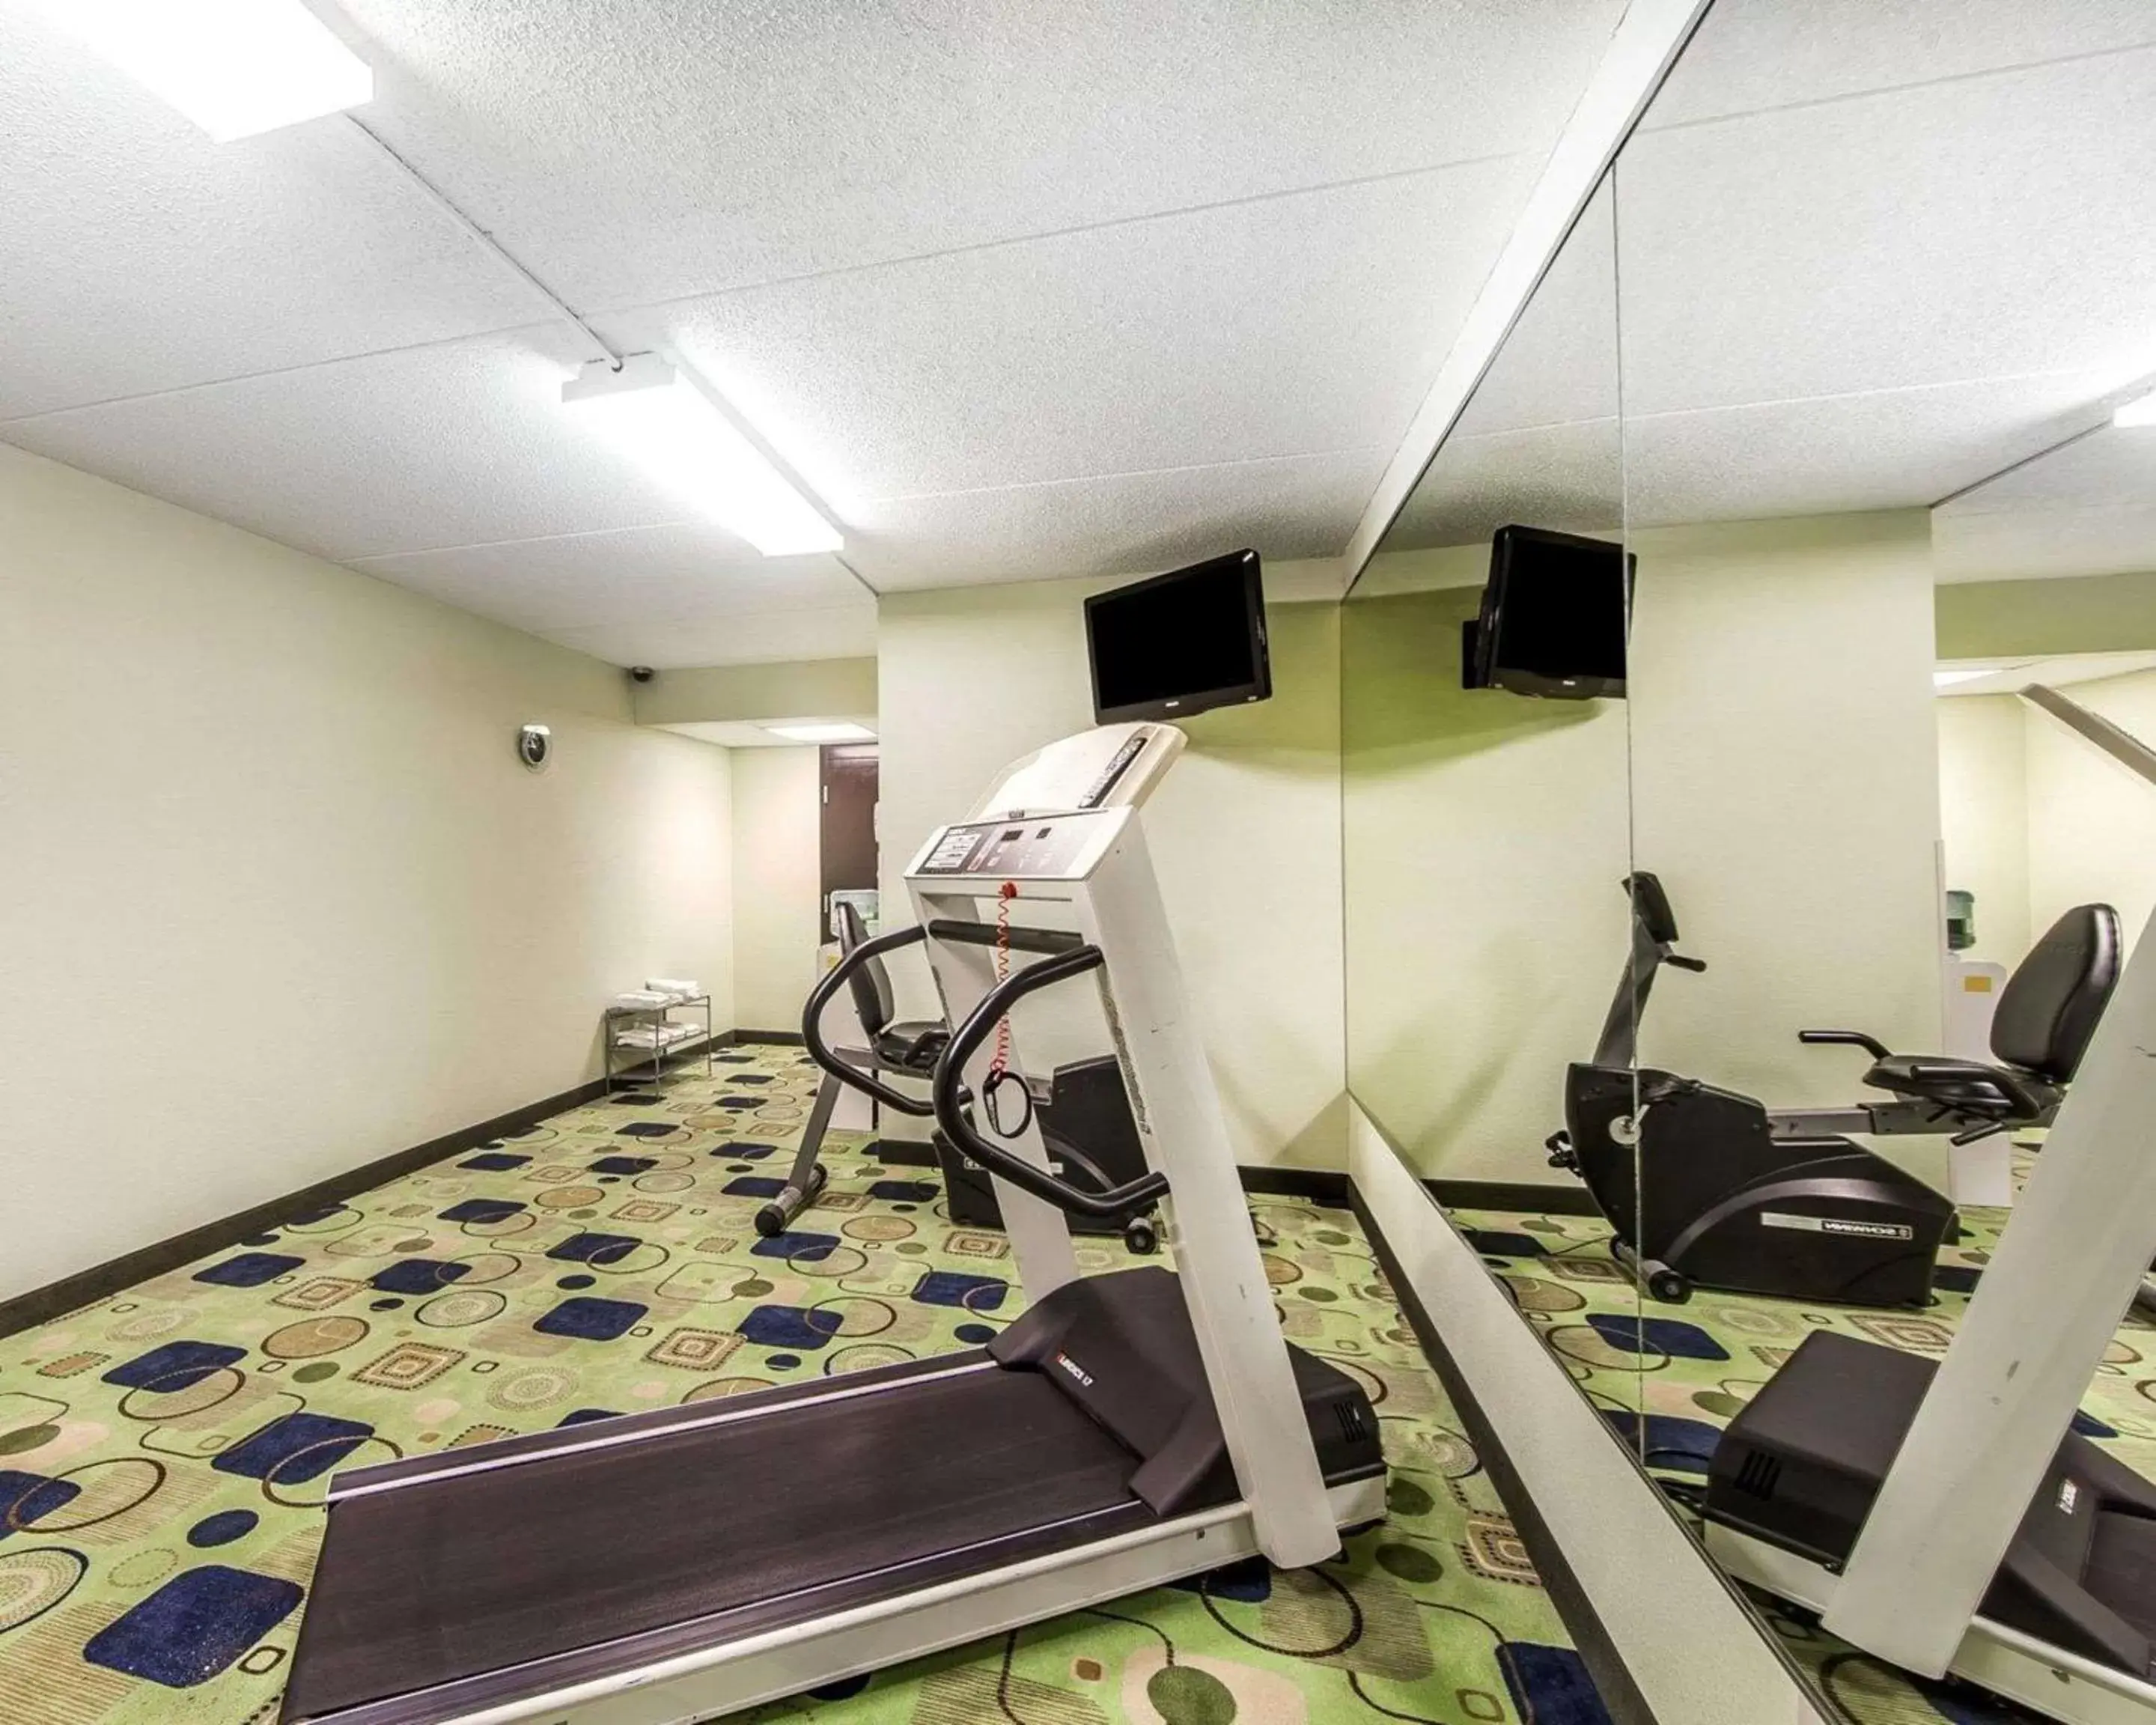 Fitness centre/facilities, Fitness Center/Facilities in Quality Inn West - Sweetwater